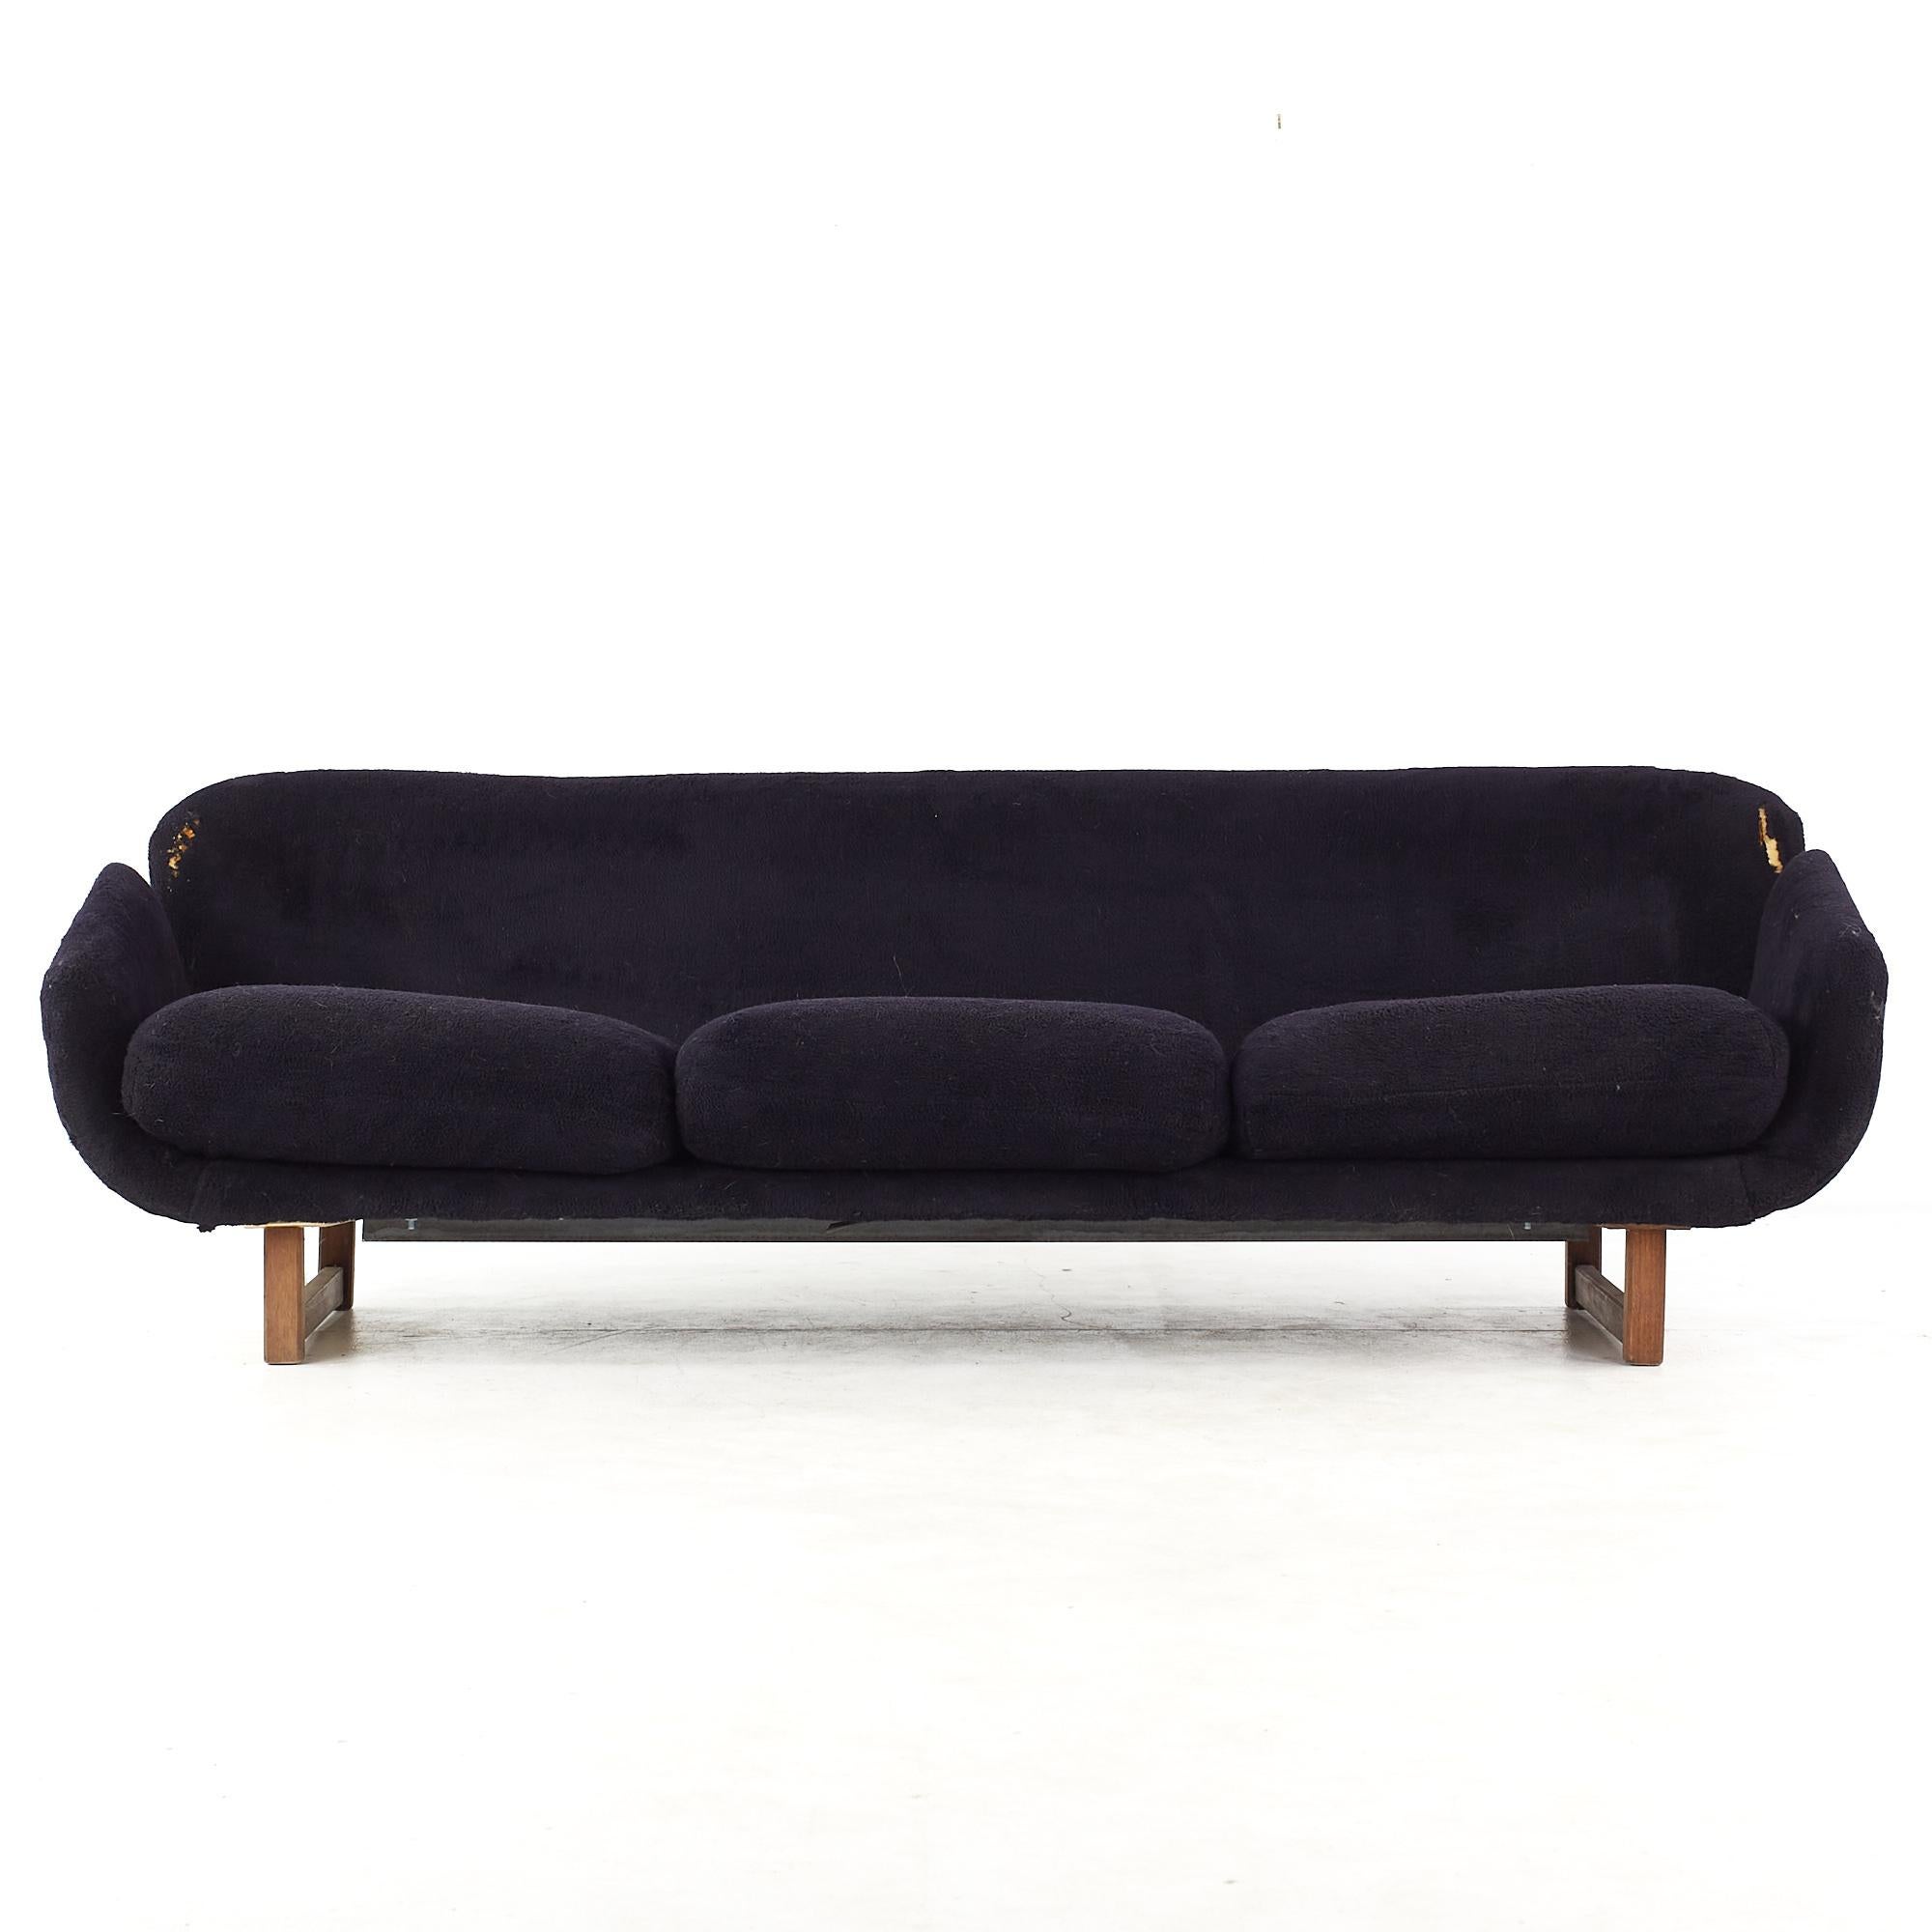 Arne Jacobsen for Fritz Hansen Style Mid Century Swan Sofa

This sofa measures: 84 wide x 33 deep x 27 inches high, with a seat height of 16 and arm height of 20 inches

All pieces of furniture can be had in what we call restored vintage condition.